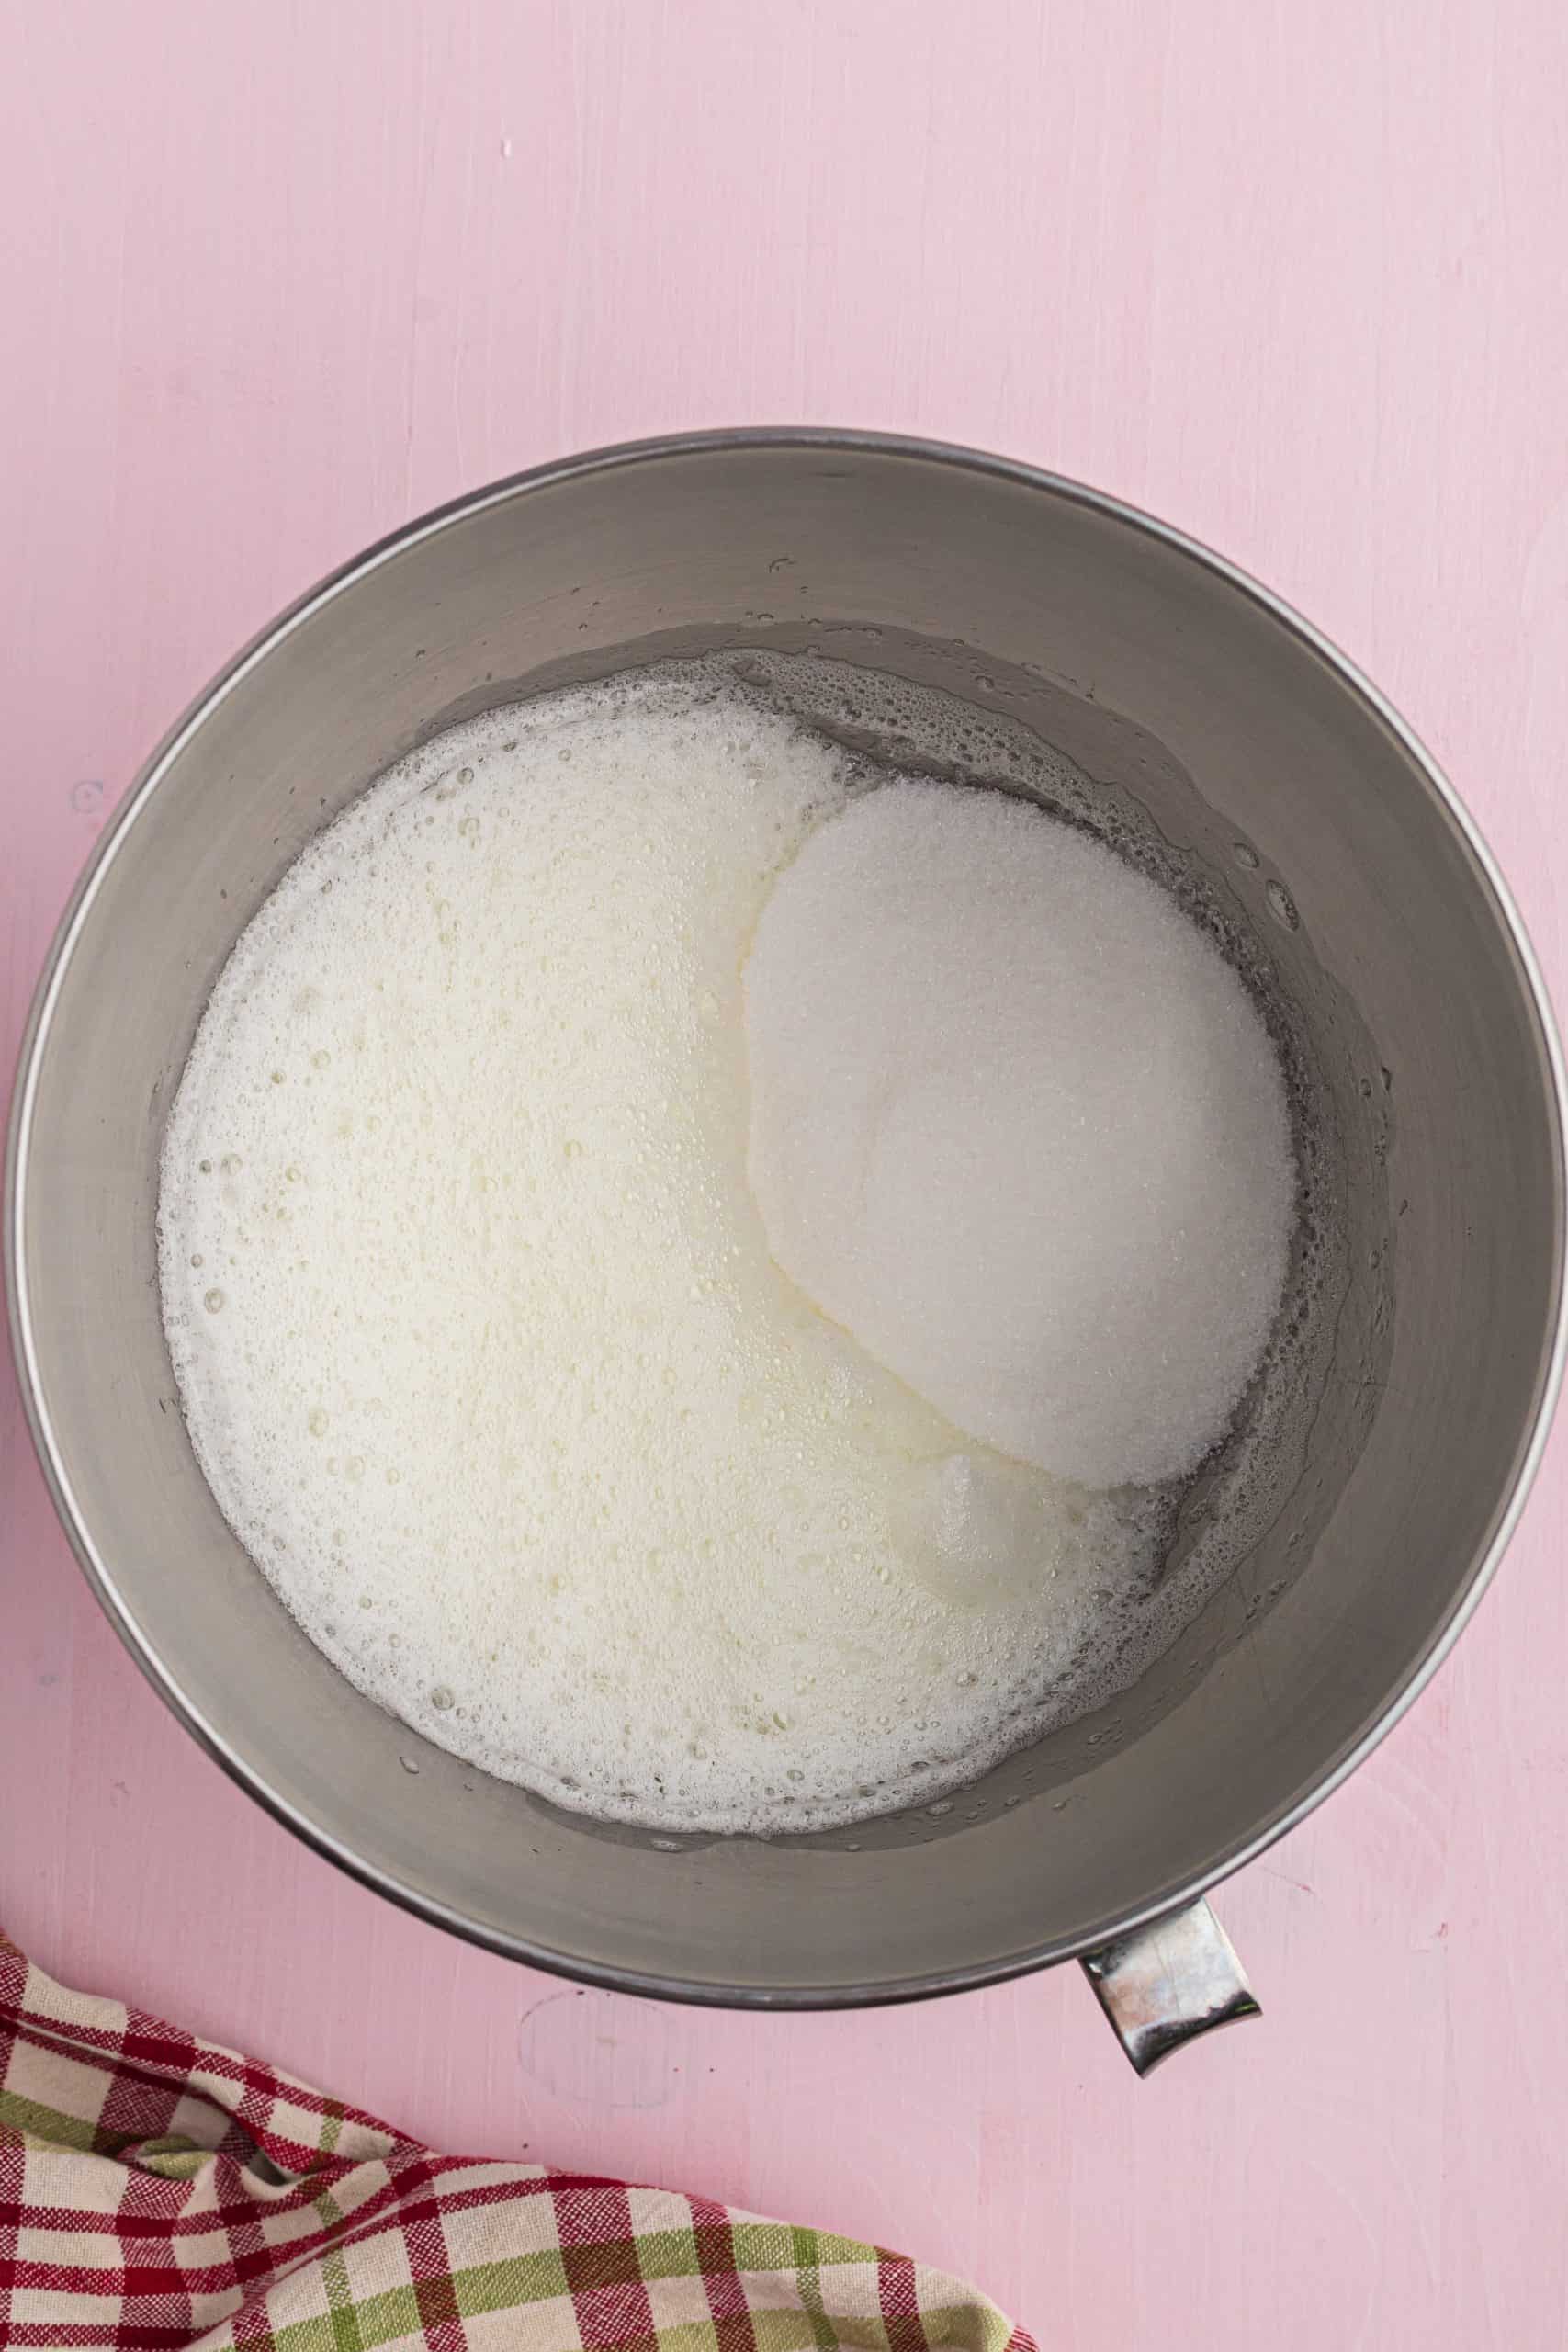 sugar added to egg whites in a mixing bowl.